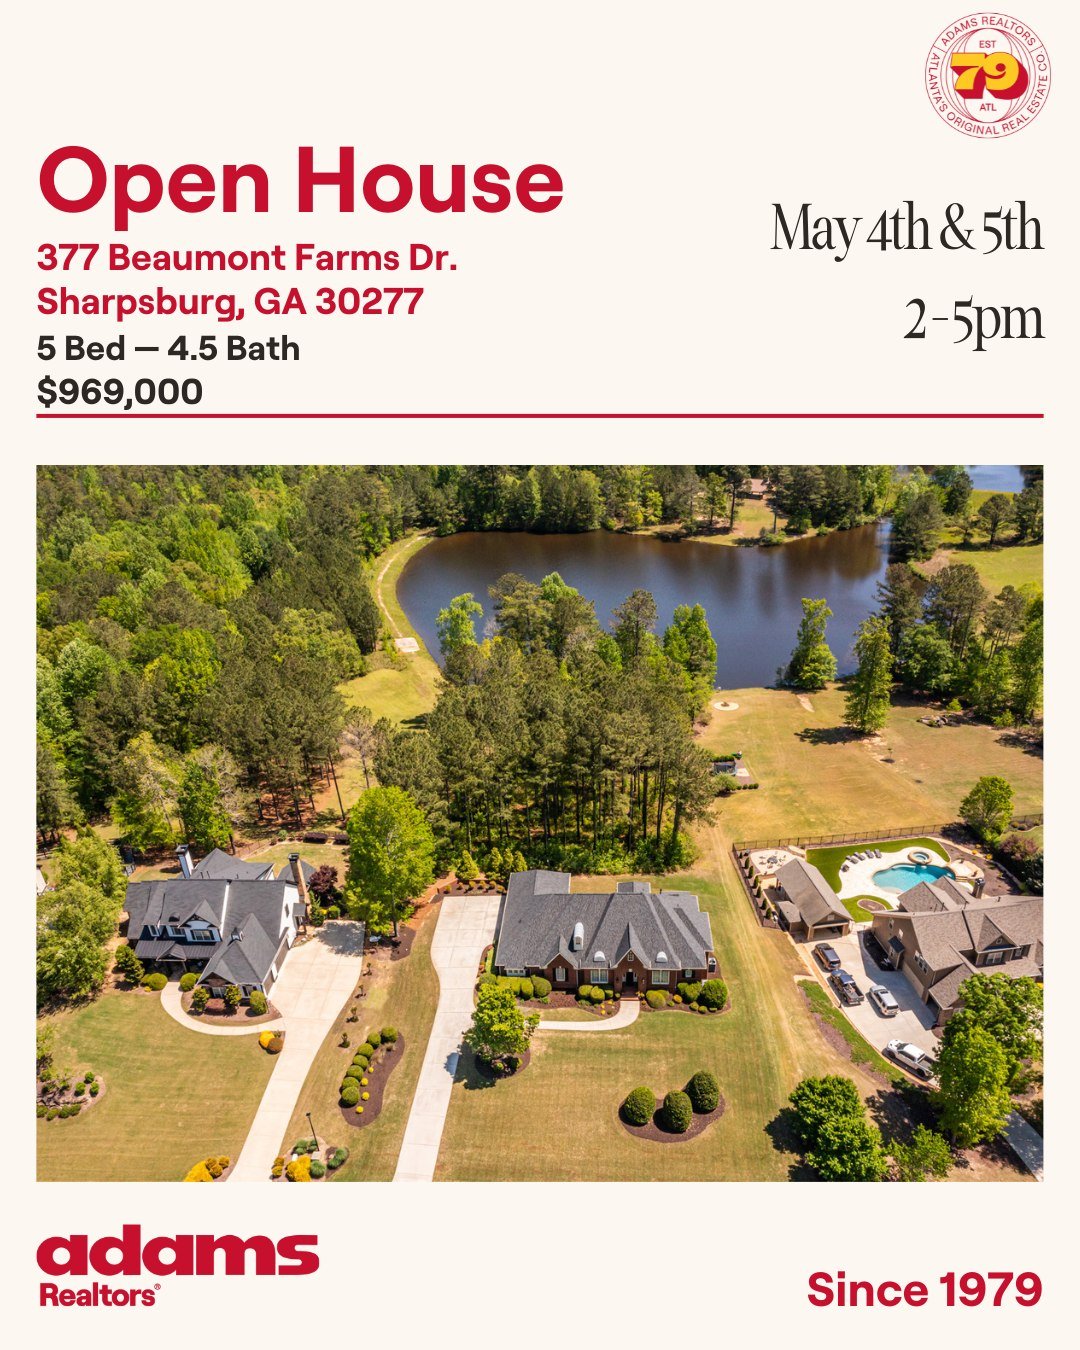 New Listing &amp; Open House in Sharpsburg! 377 Beaumont Farms Dr 5 BR | 4.5 BA $969,000

Open House Saturday May 4th &amp; Sunday May 5th from 2-5pm!

Looking for that hard to find four side brick ranch in an absolutely perfect neighborhood for conv